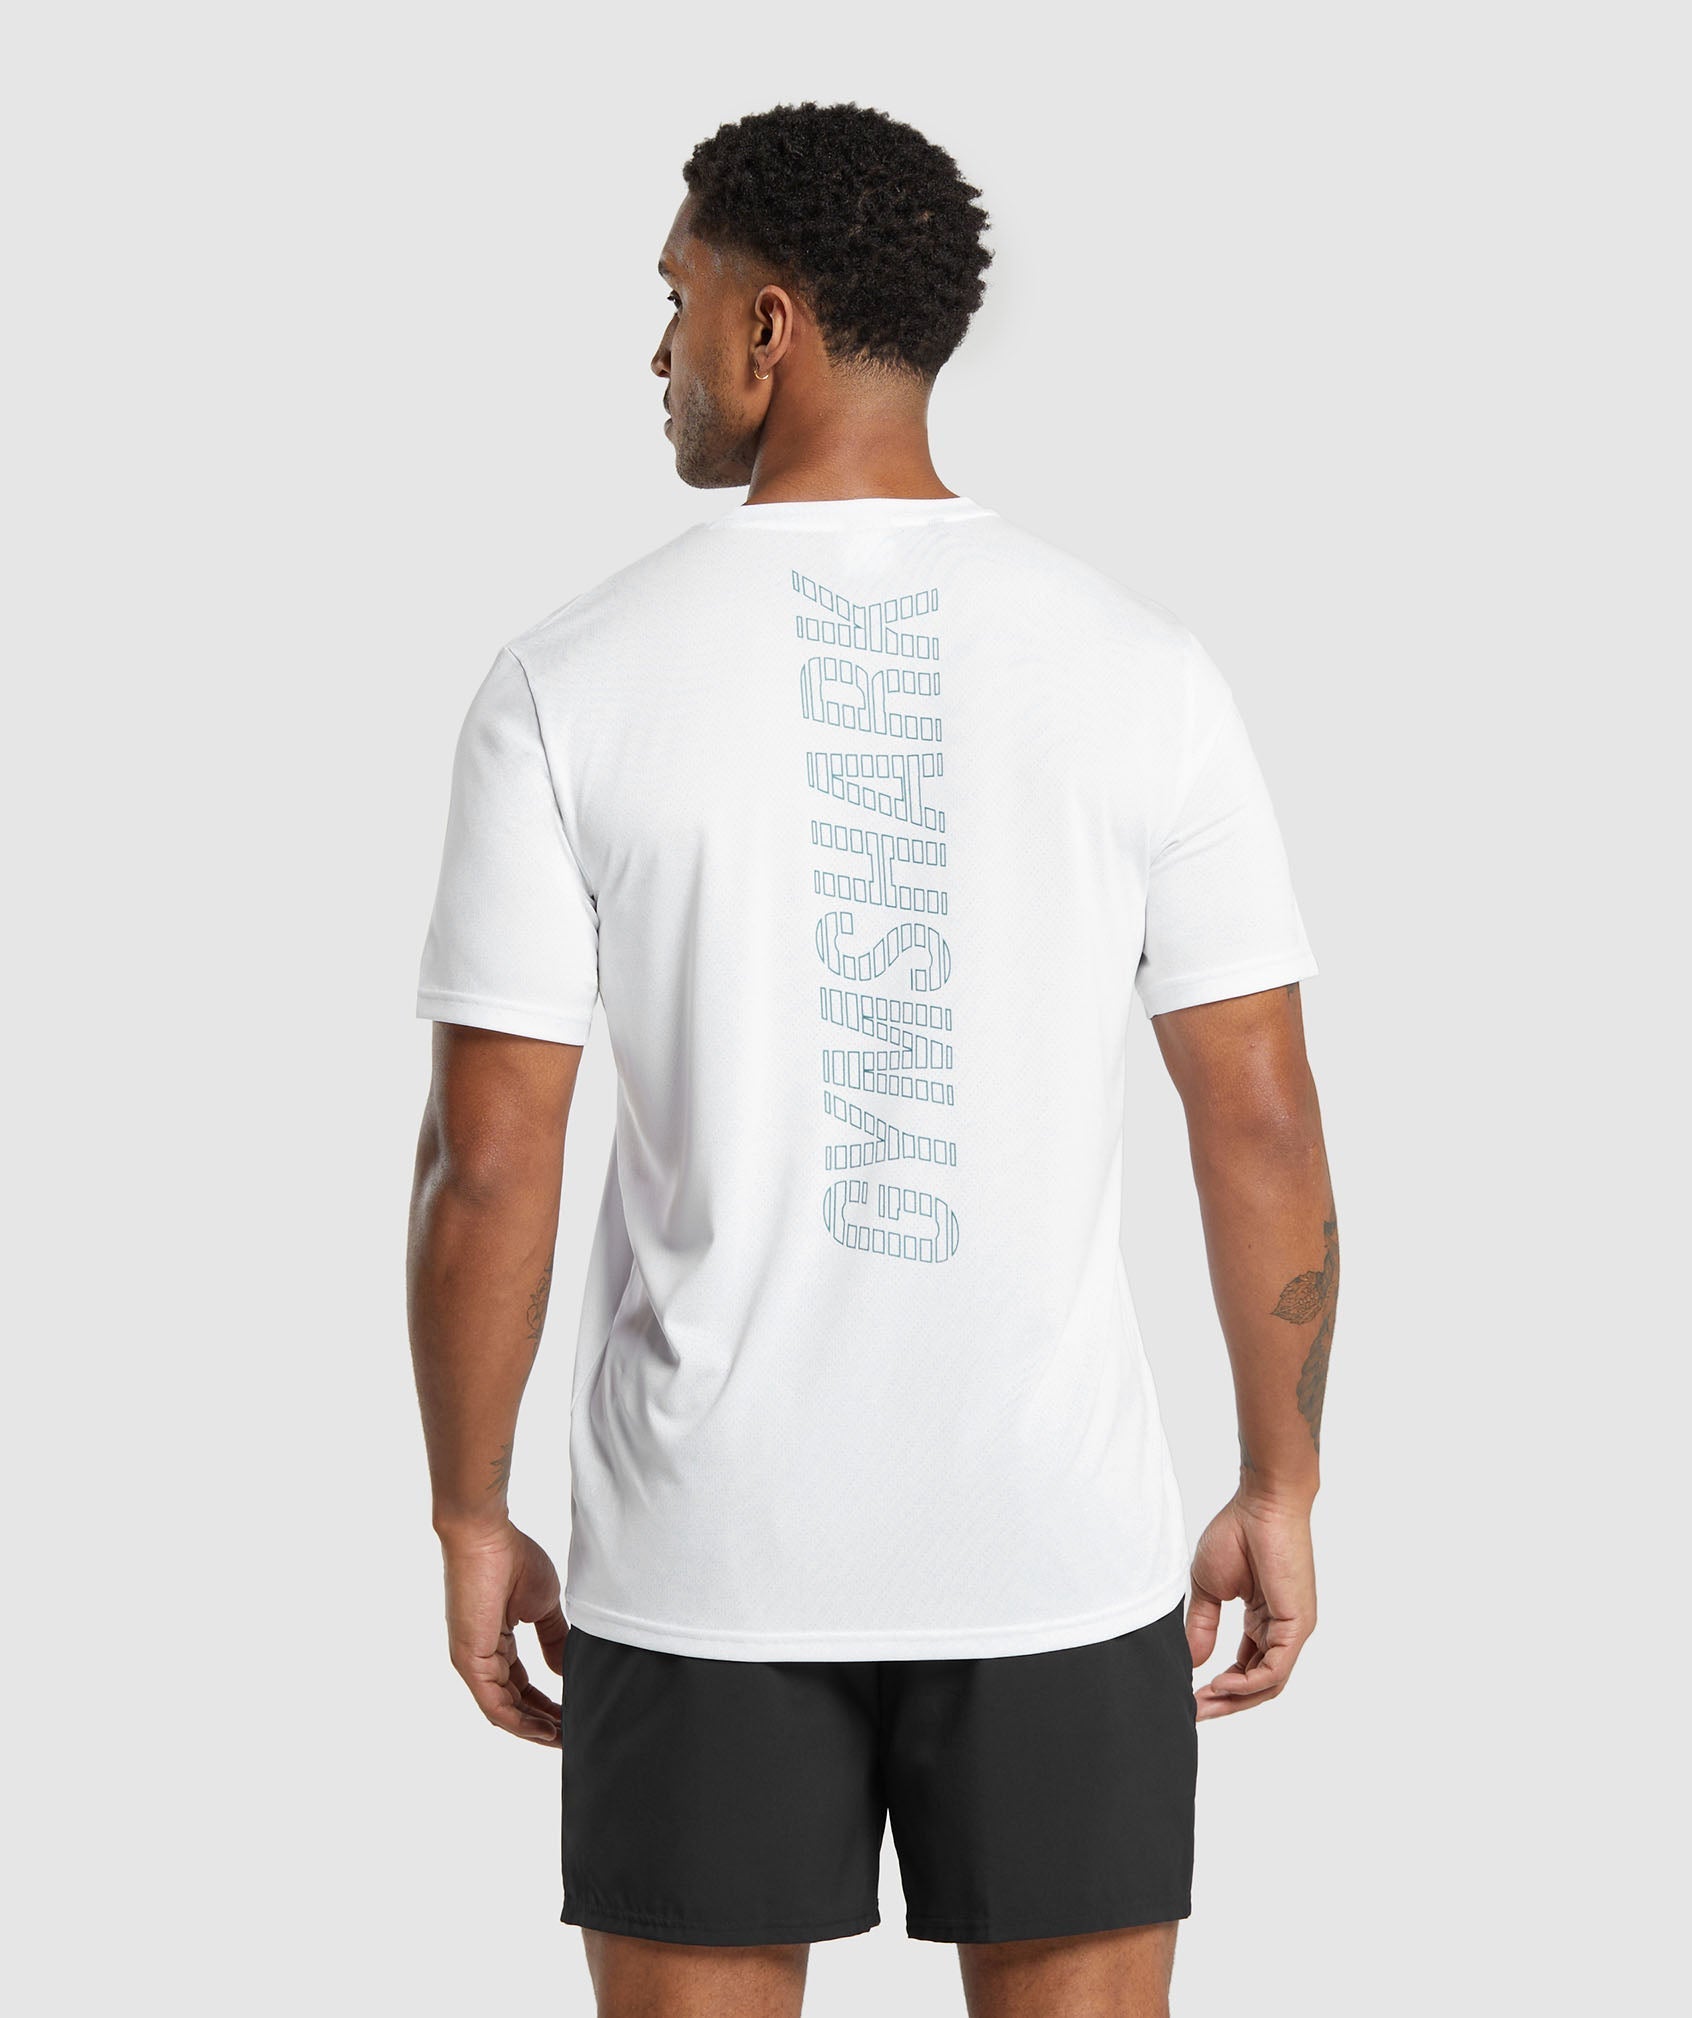 Conditioning Goods T-Shirt in White - view 2